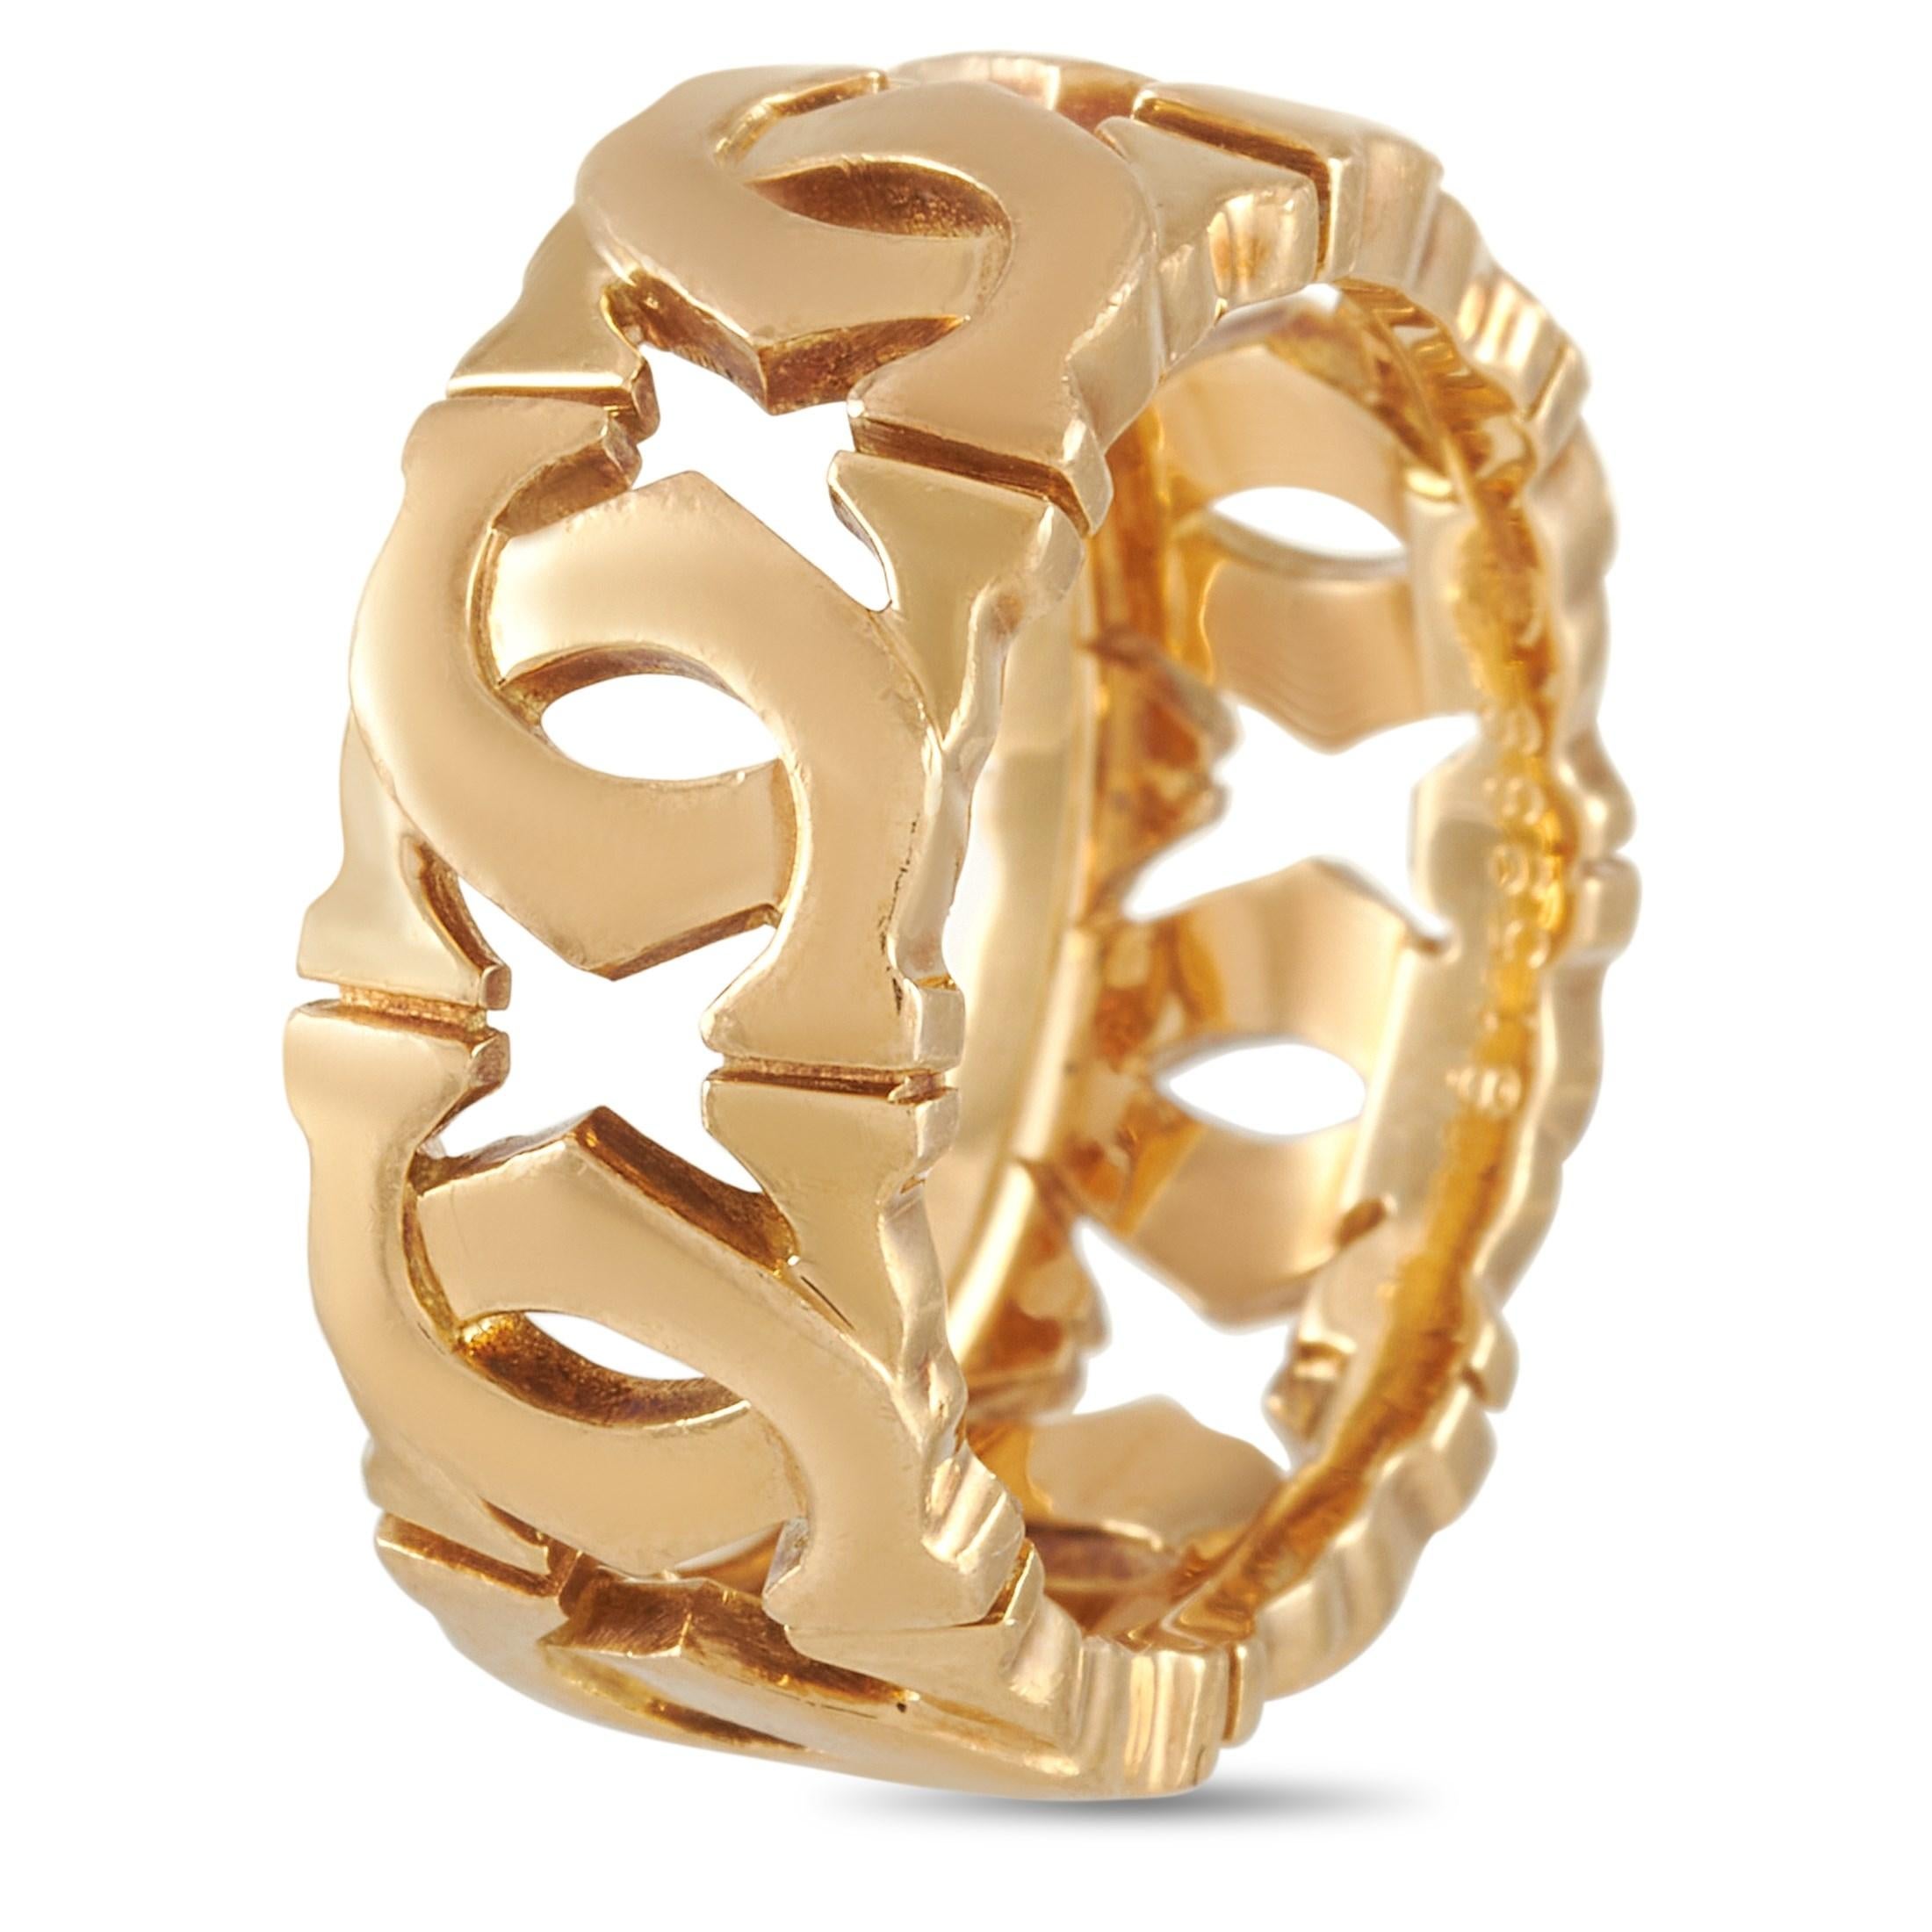 This unique 18K Yellow Gold Cartier Double C Ring will have people doing a double-take to catch another glimpse of it. The band is made with 18K Yellow Gold and features a pattern of interlocking openwork C's throughout. The ring has a band